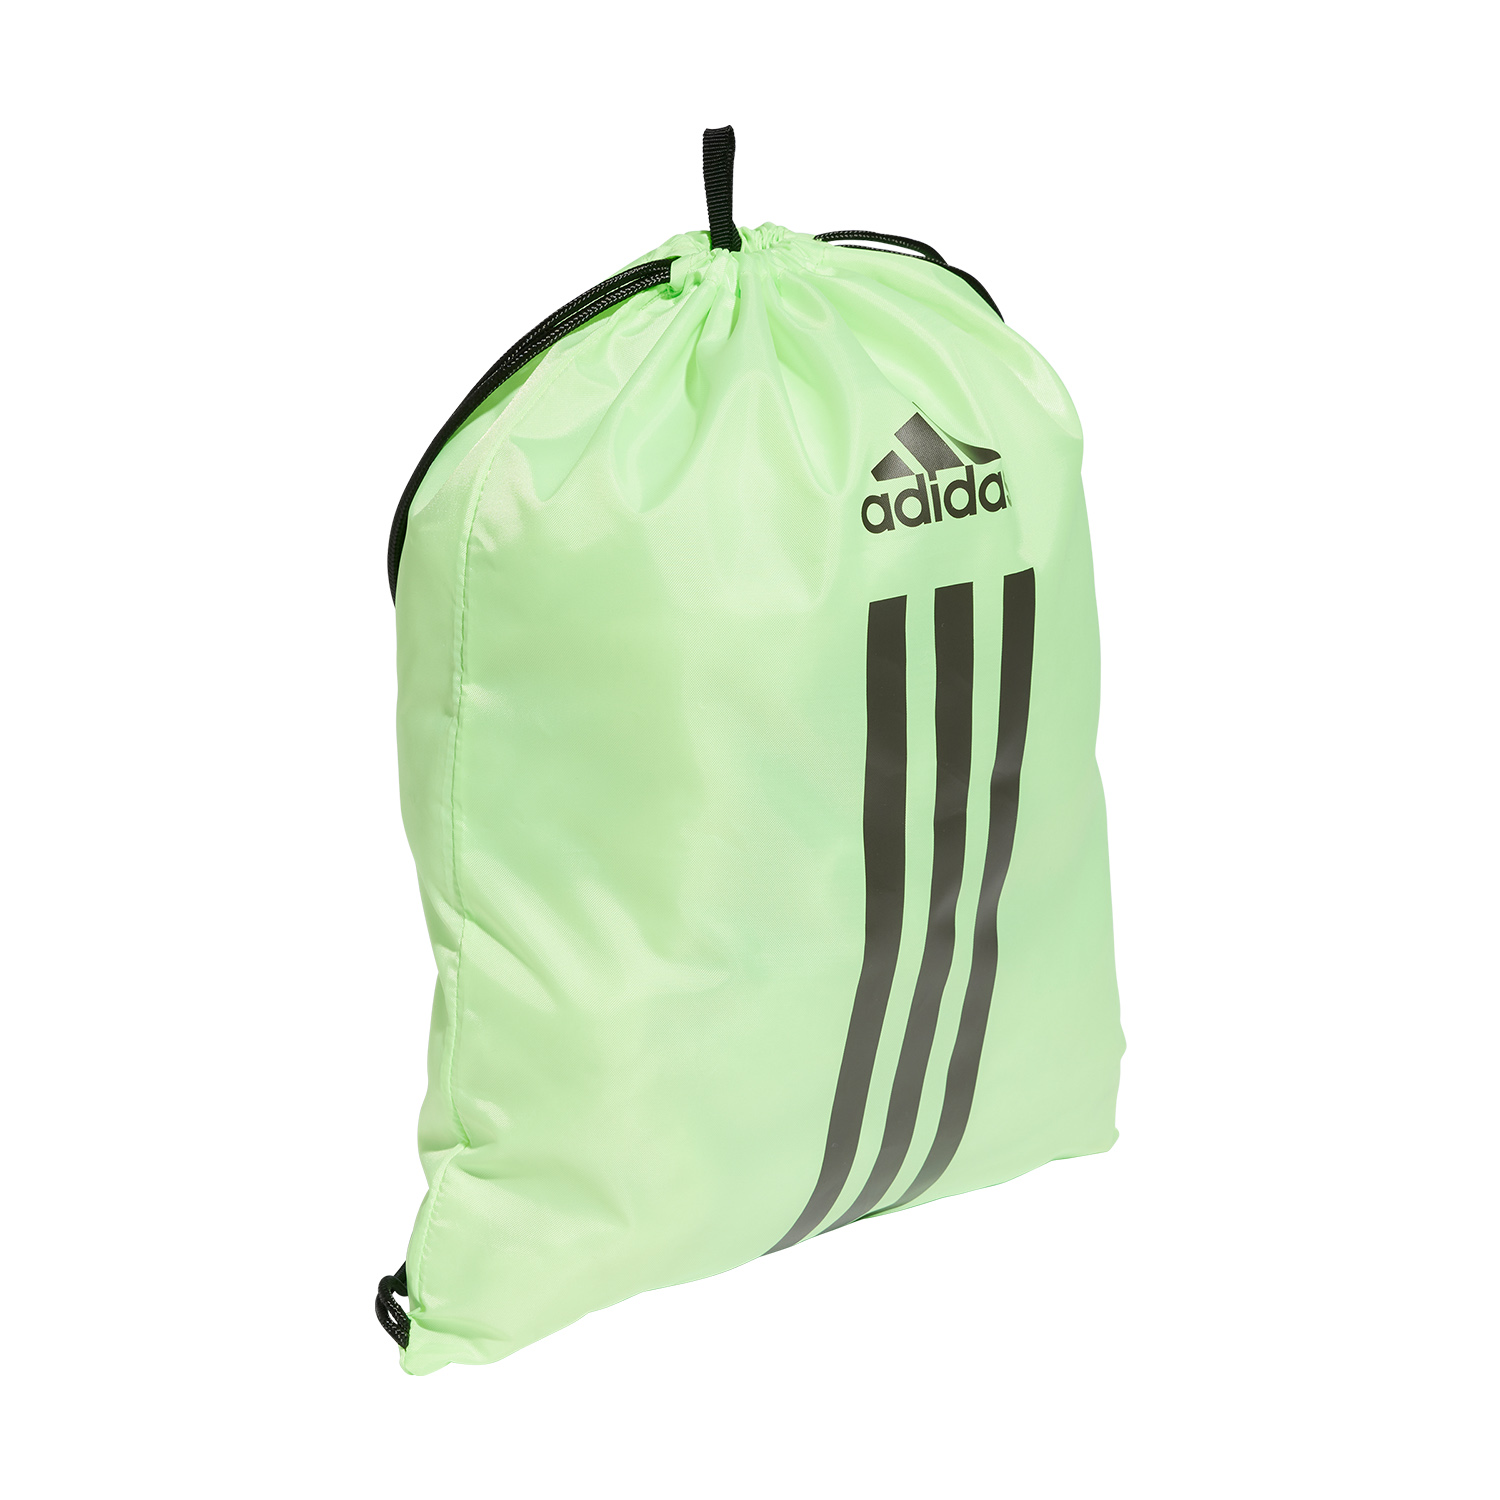 adidas Power Sackpack - Green Spark/Shadow Olive